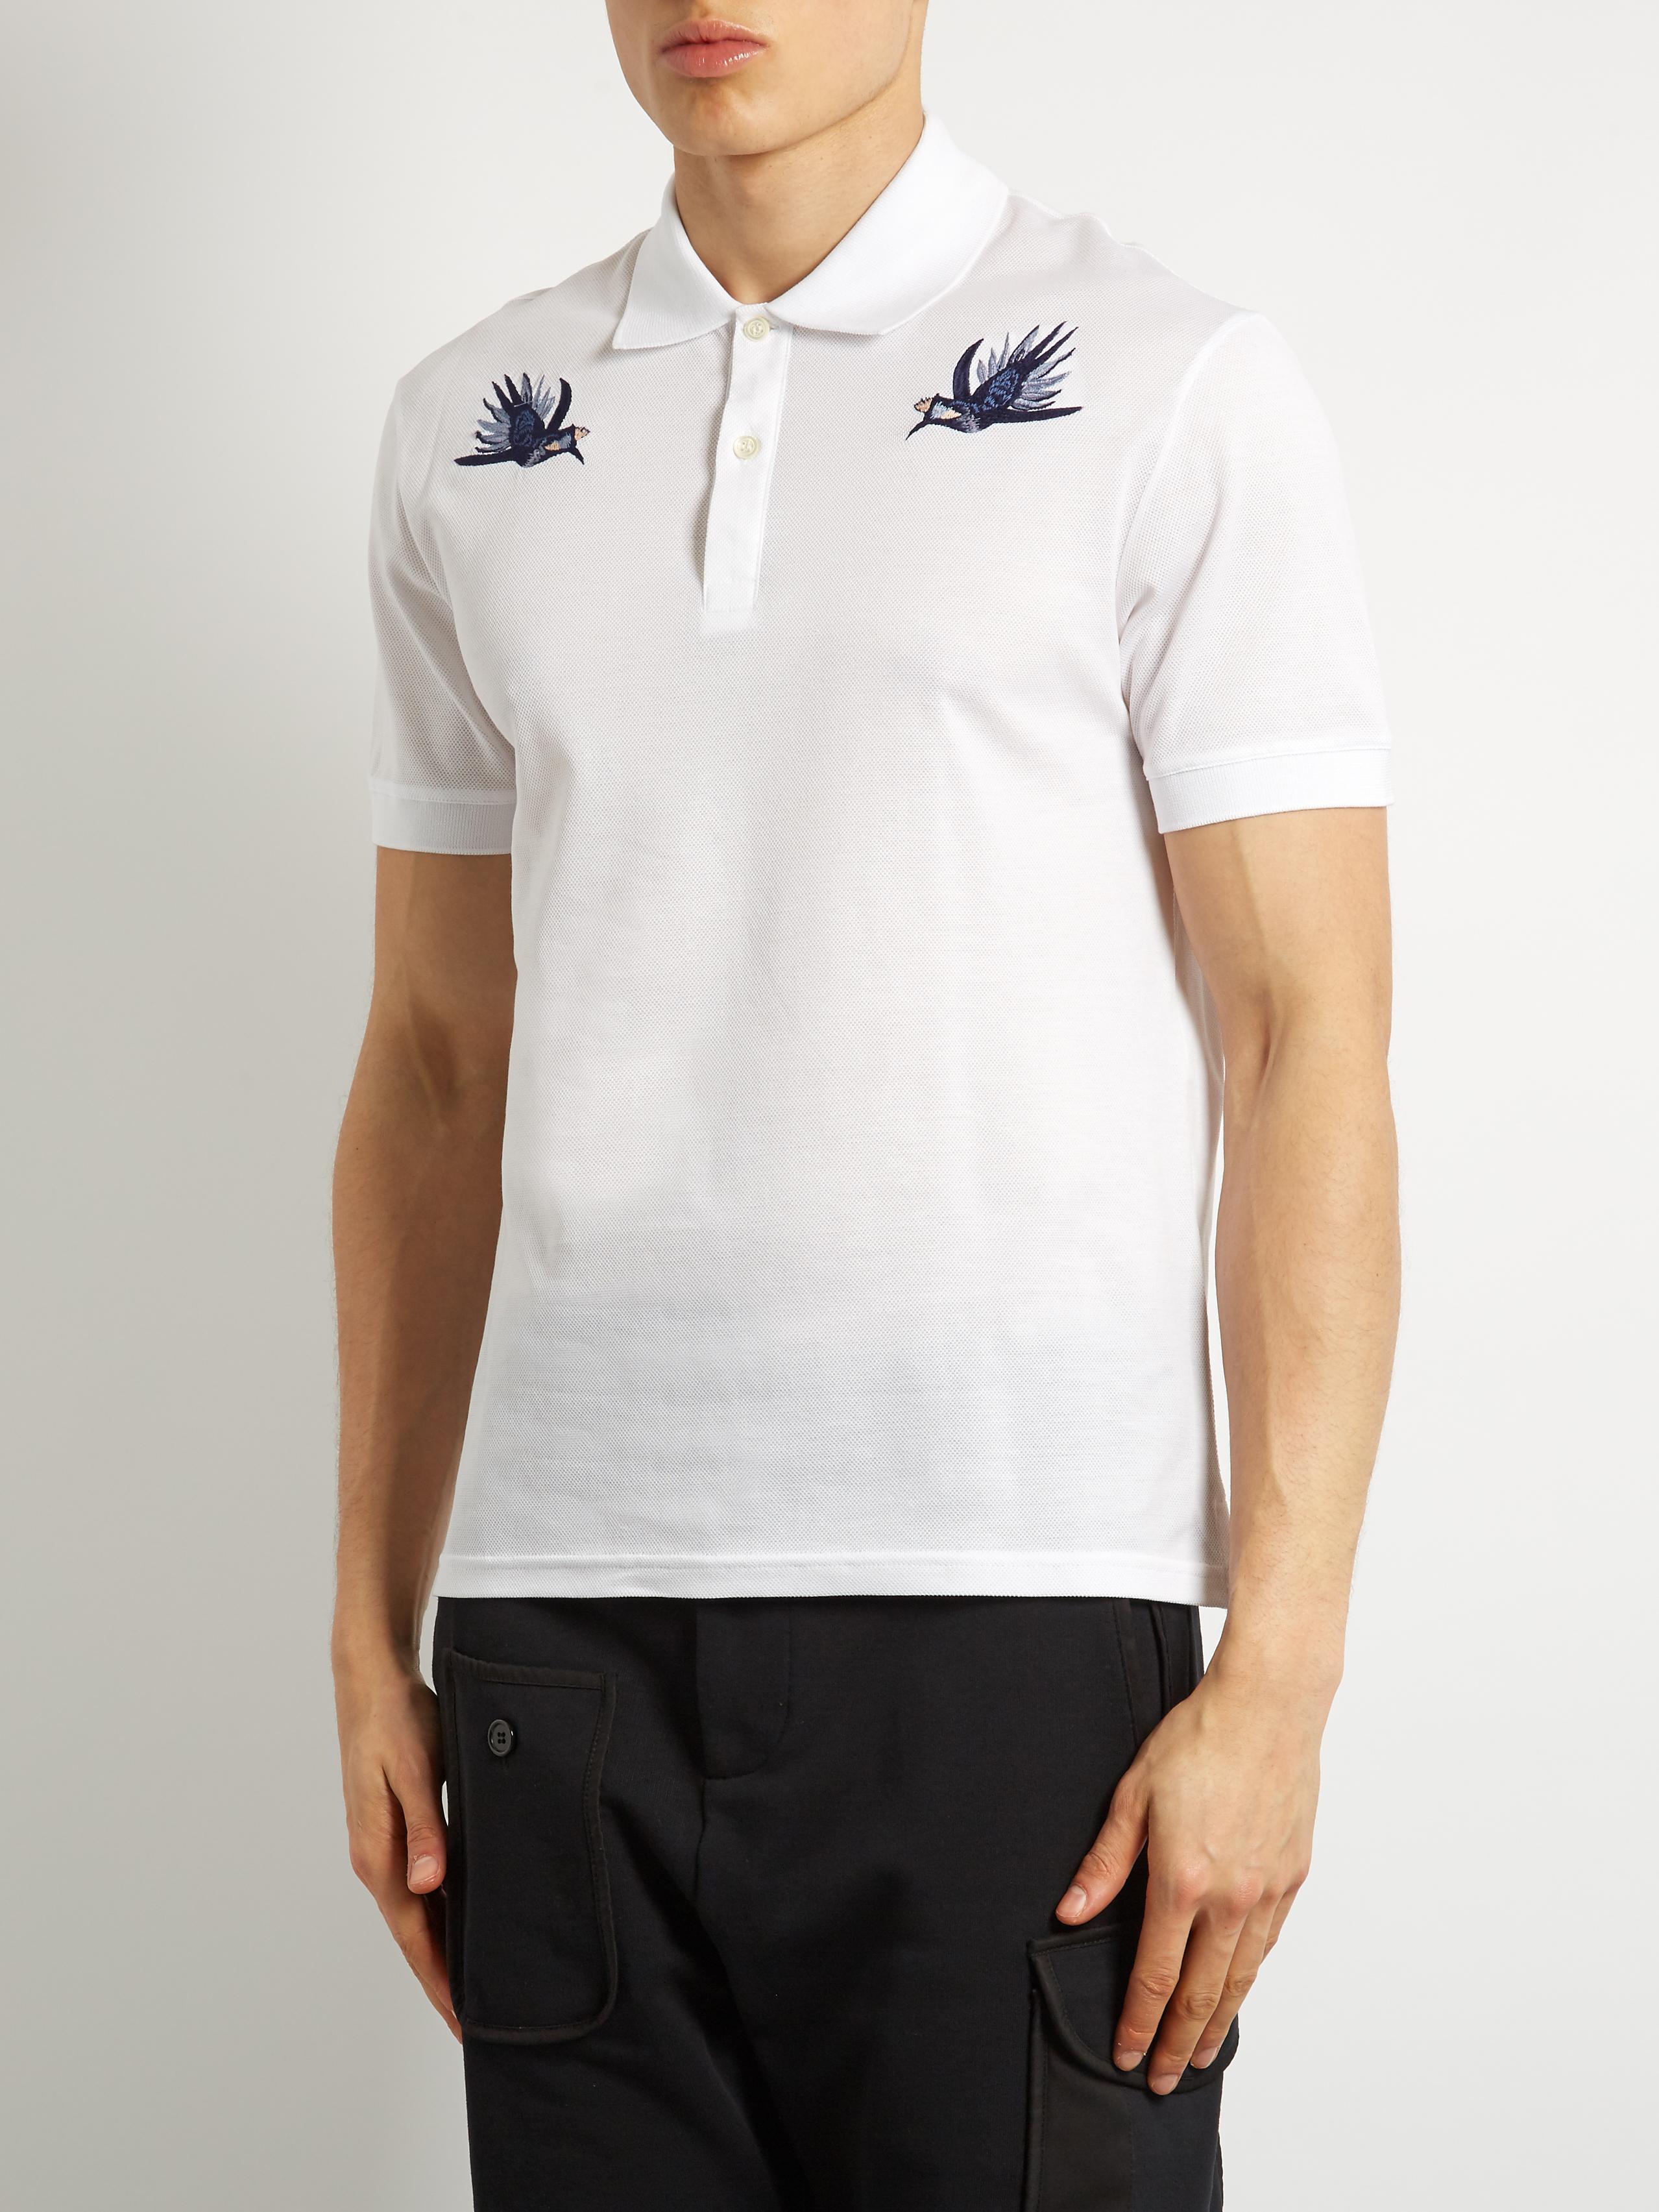 Download Lyst - Alexander McQueen Hummingbird-embroidered Polo ...